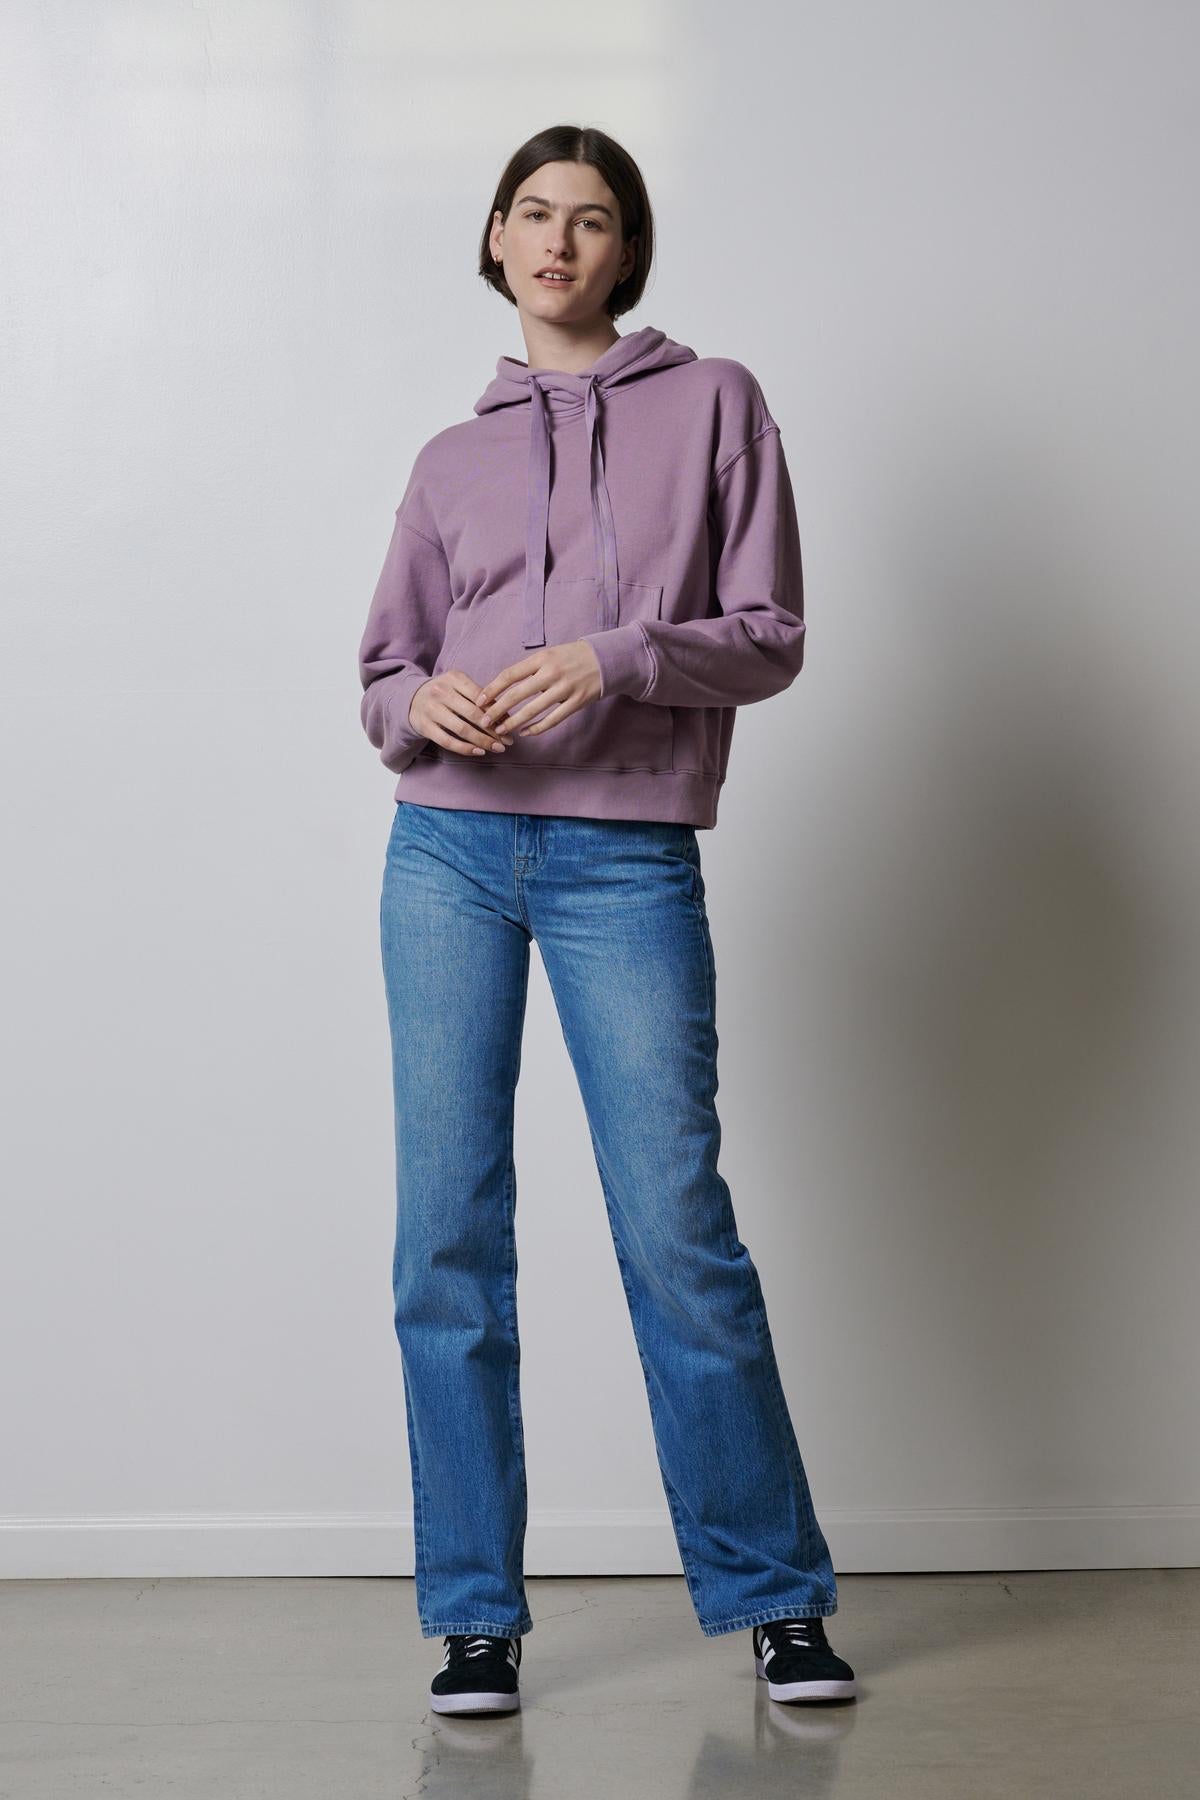 A woman wearing an OJAI HOODIE by Velvet by Jenny Graham and blue jeans.-35783045513409